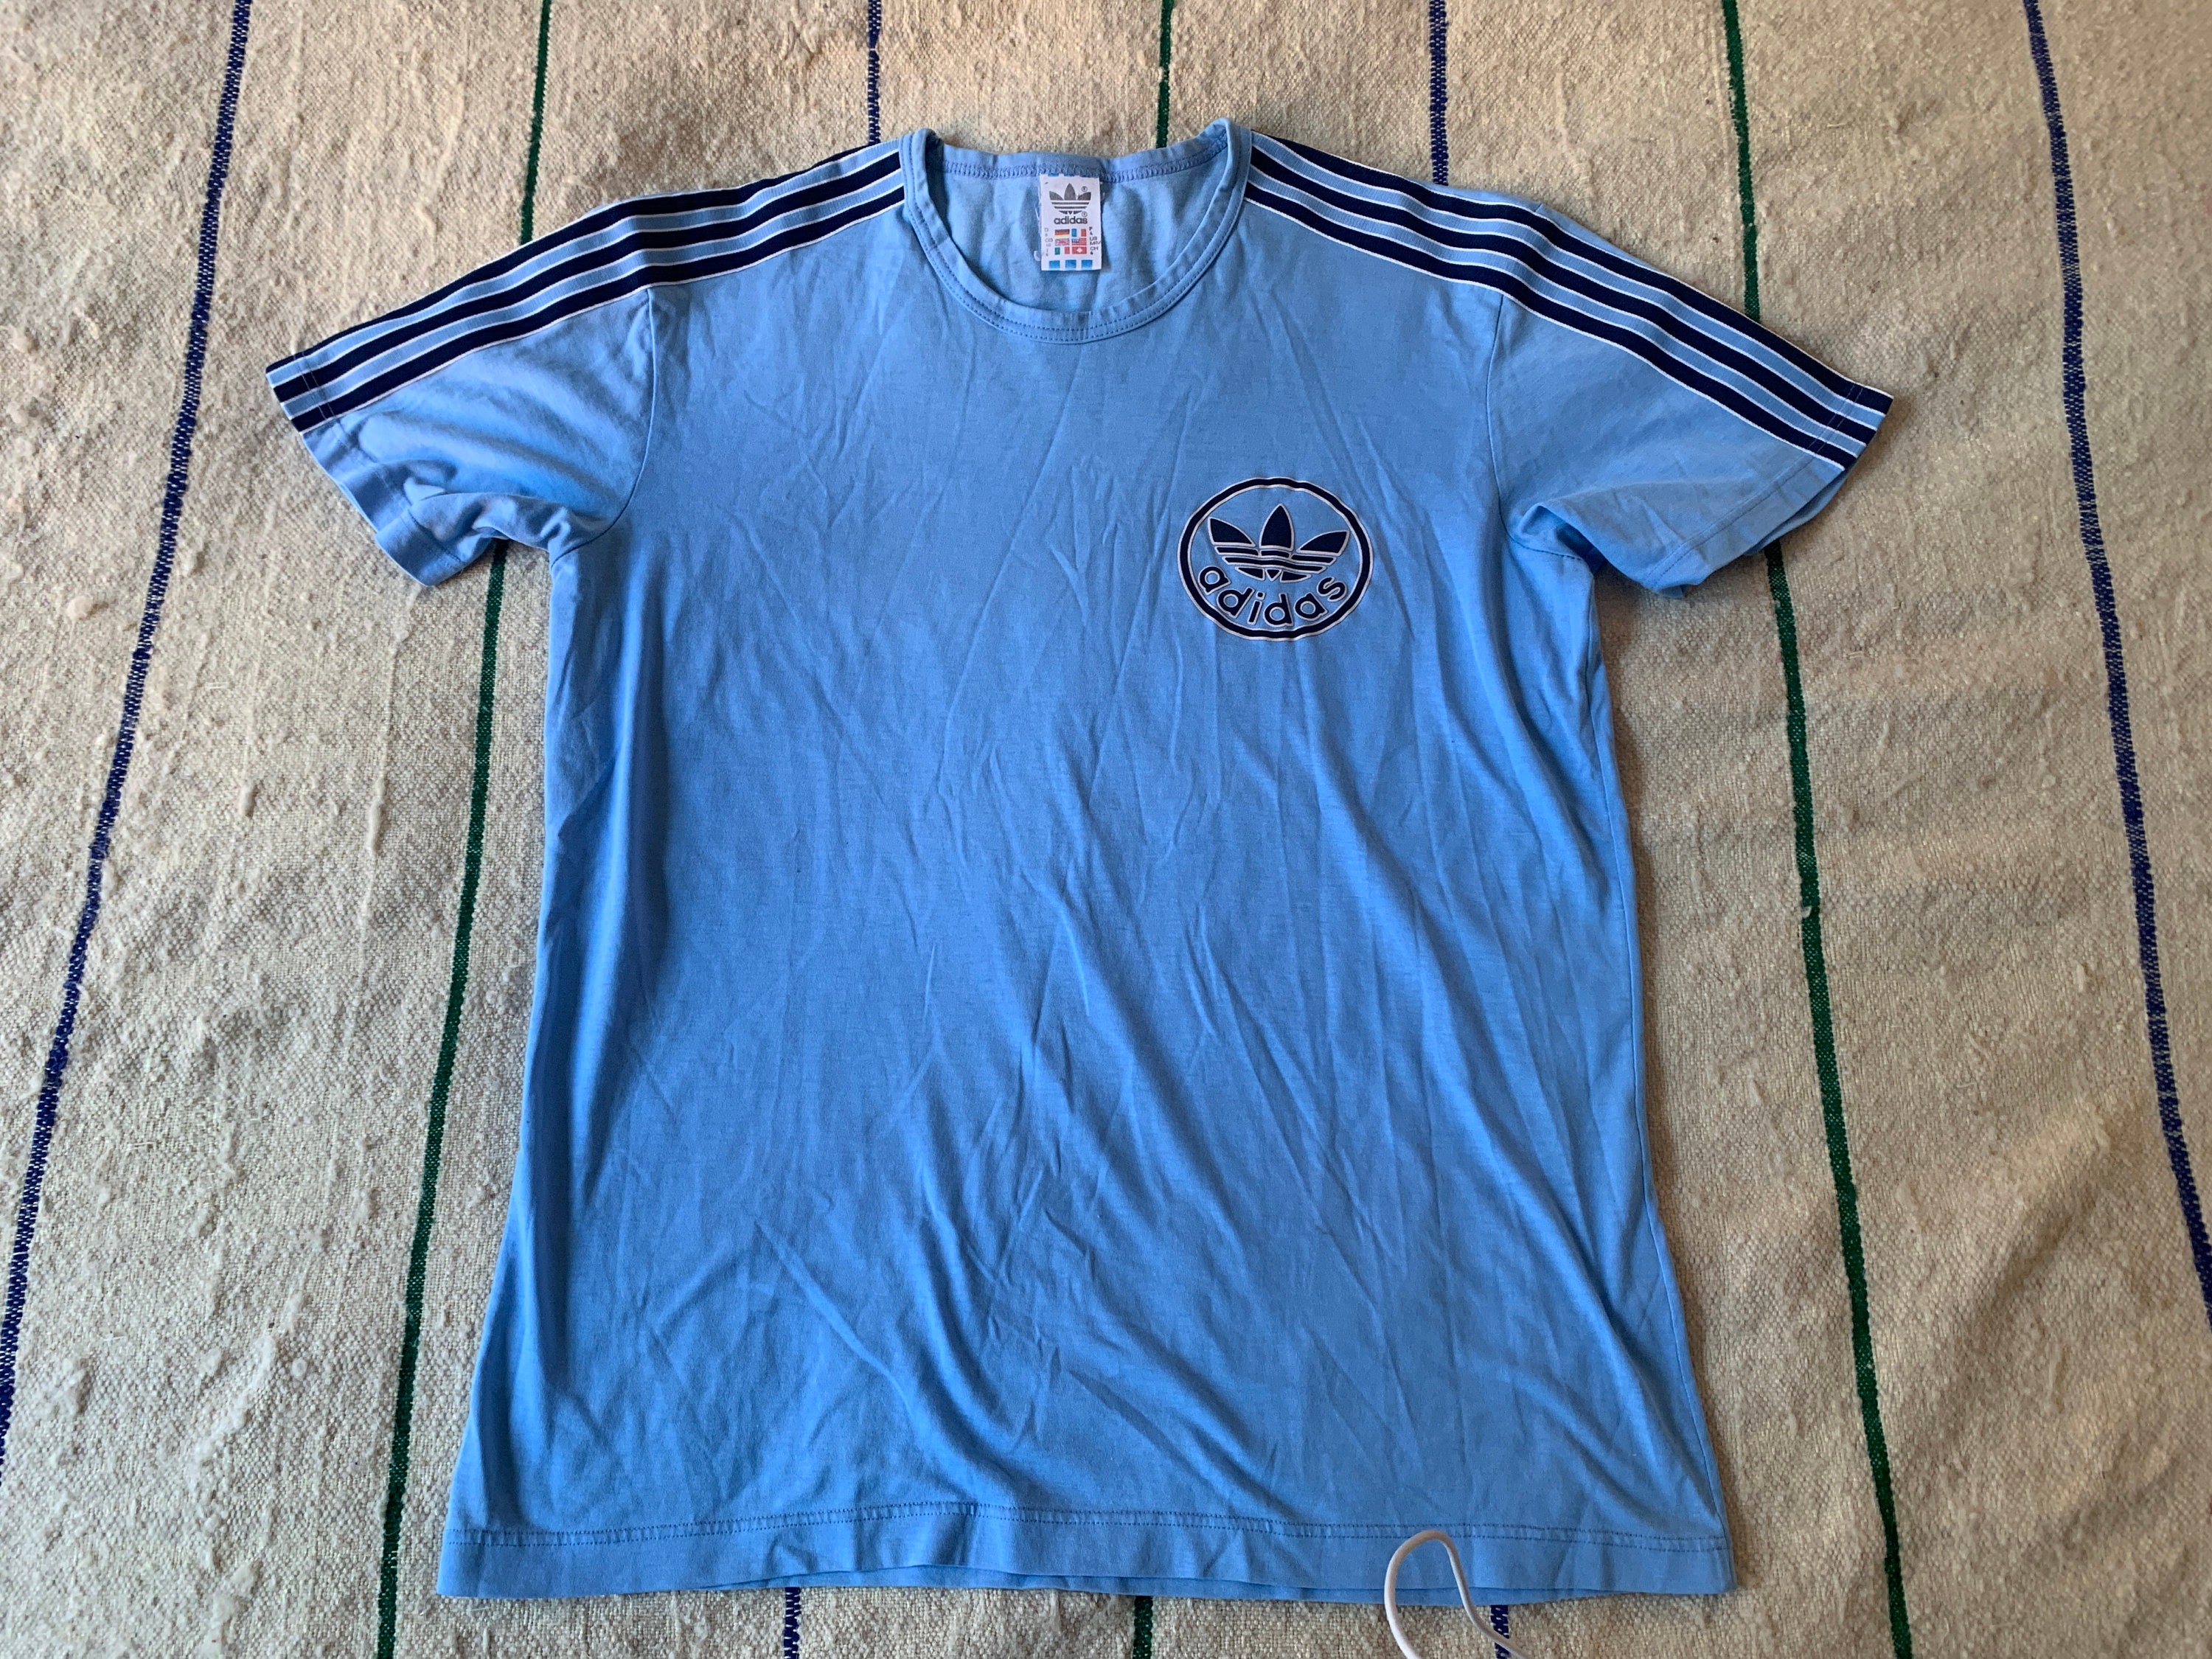 Where can I buy this retro looking Adidas T-Shirt? : r/HelpMeFind